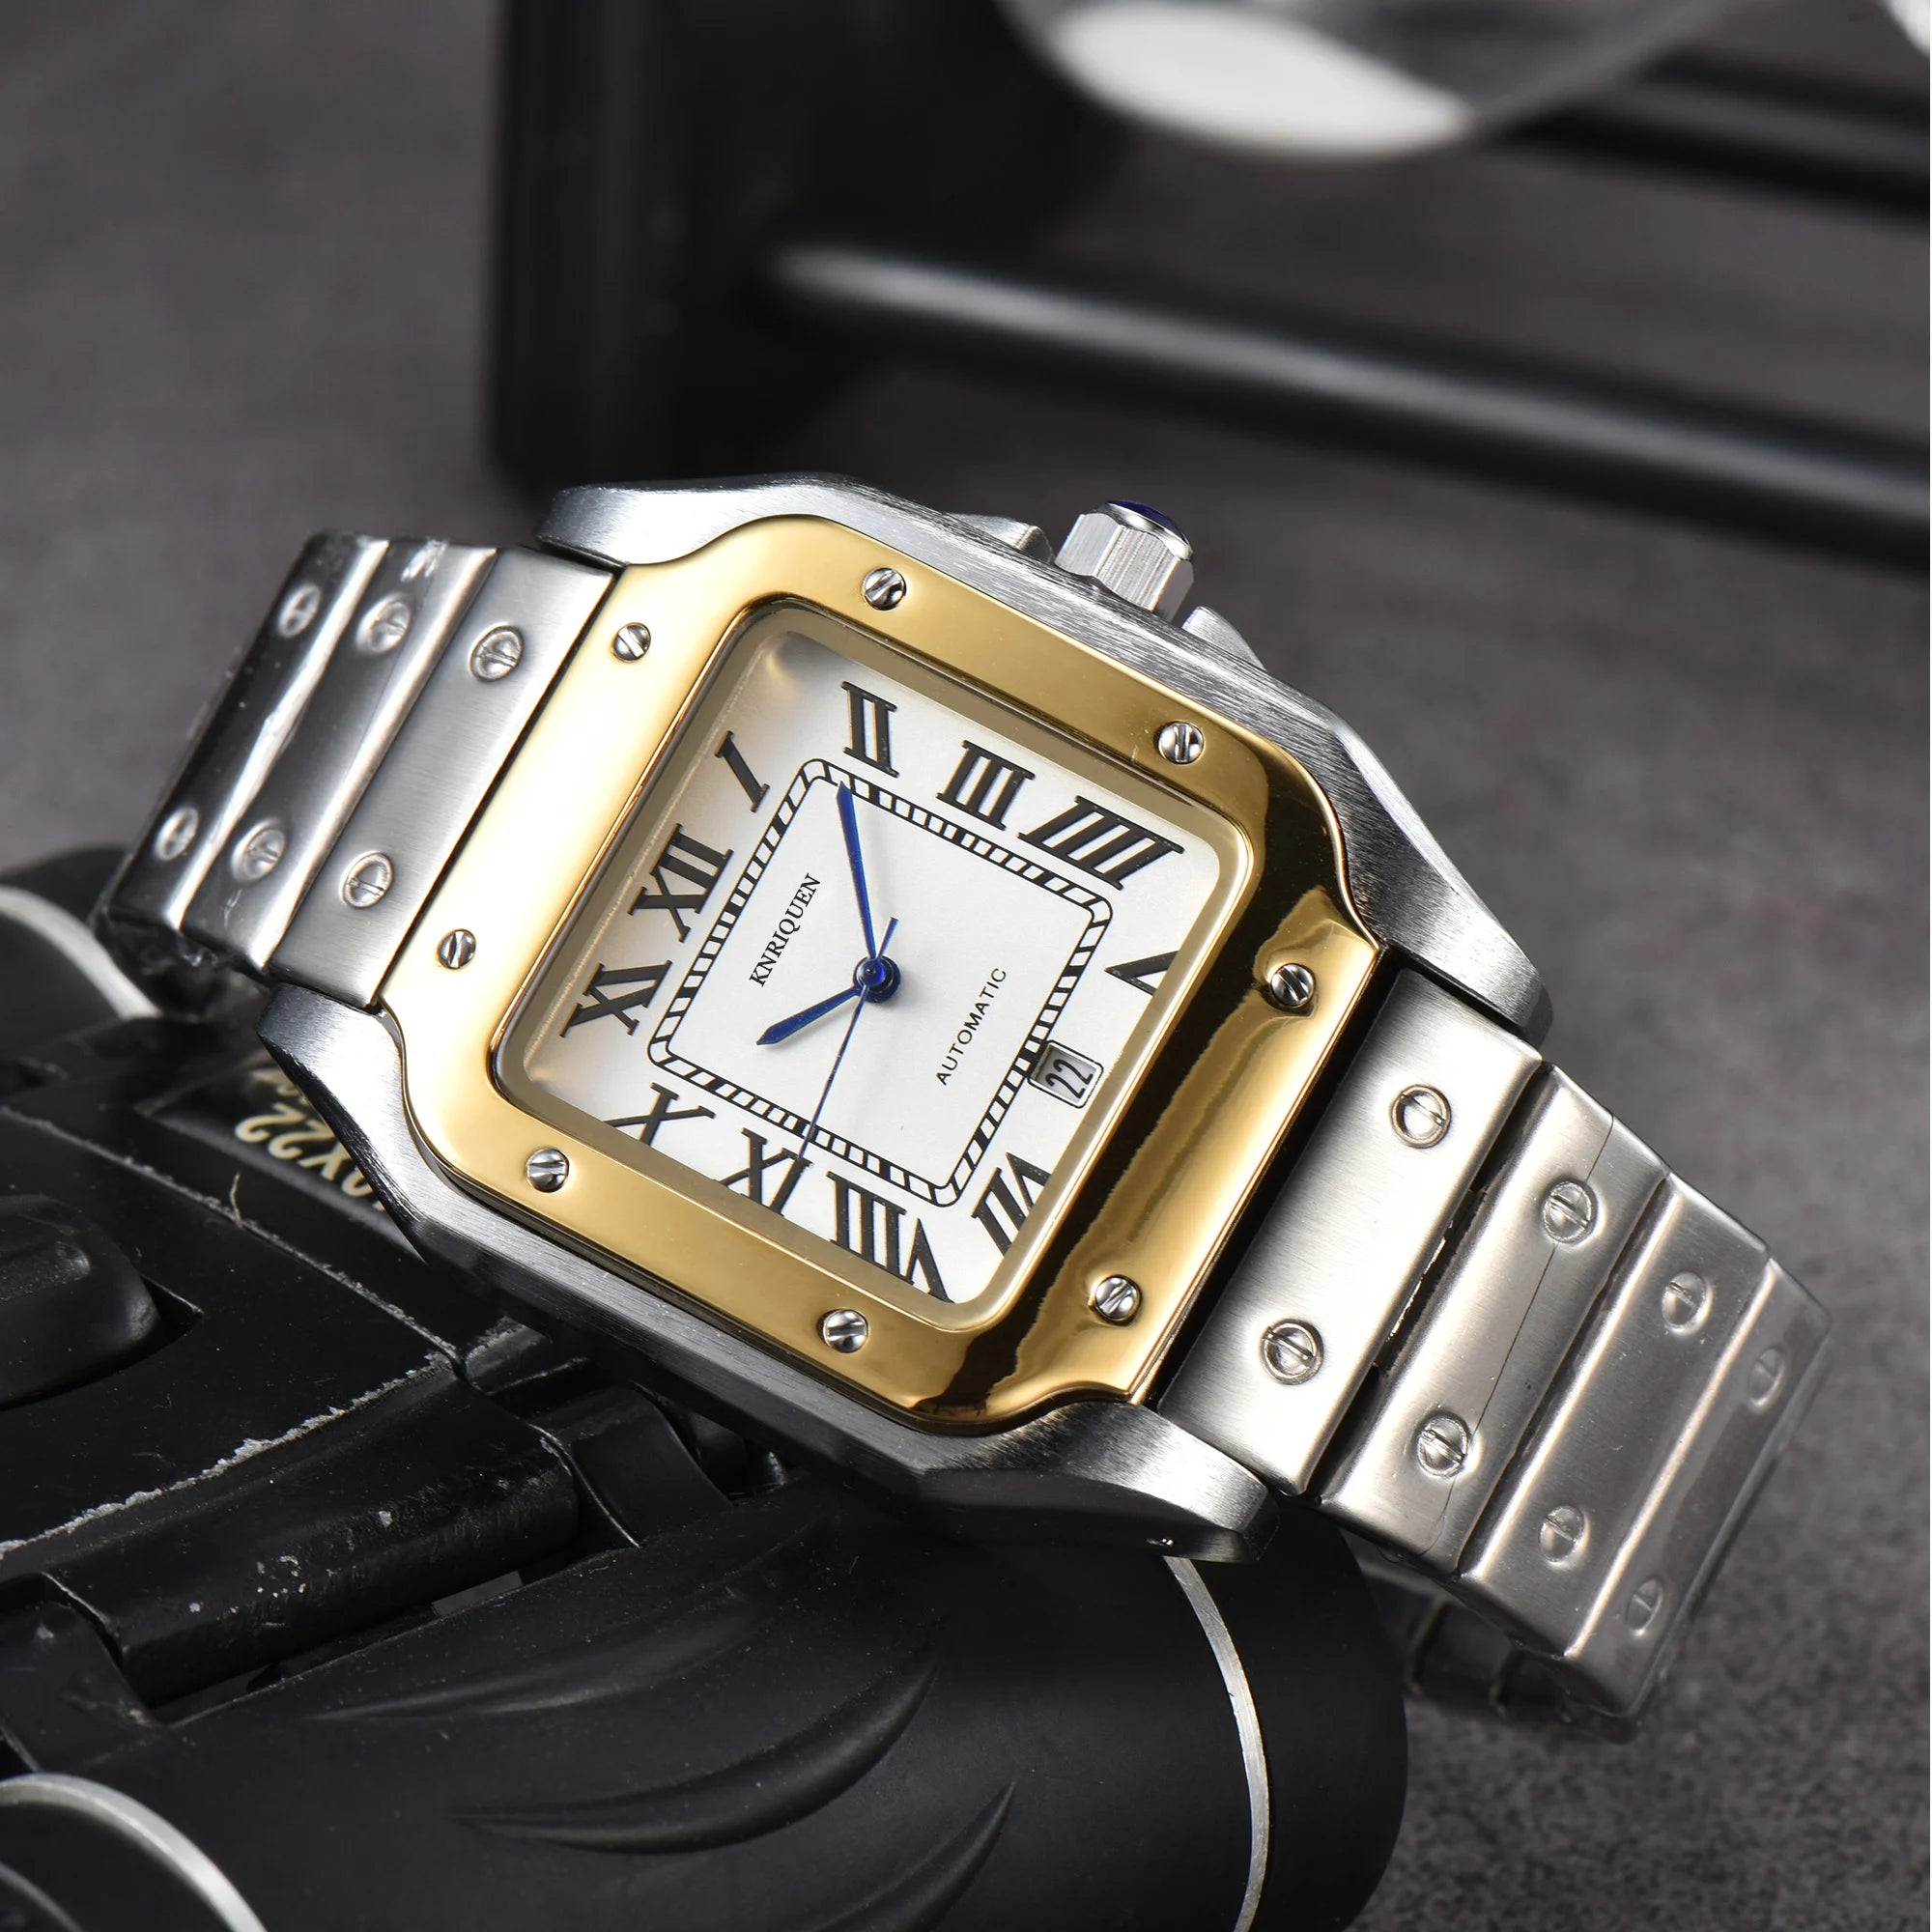 Luxury Men's Square Dial Steel Strap Watch with Automatic Date Movement  OurLum.com 1  